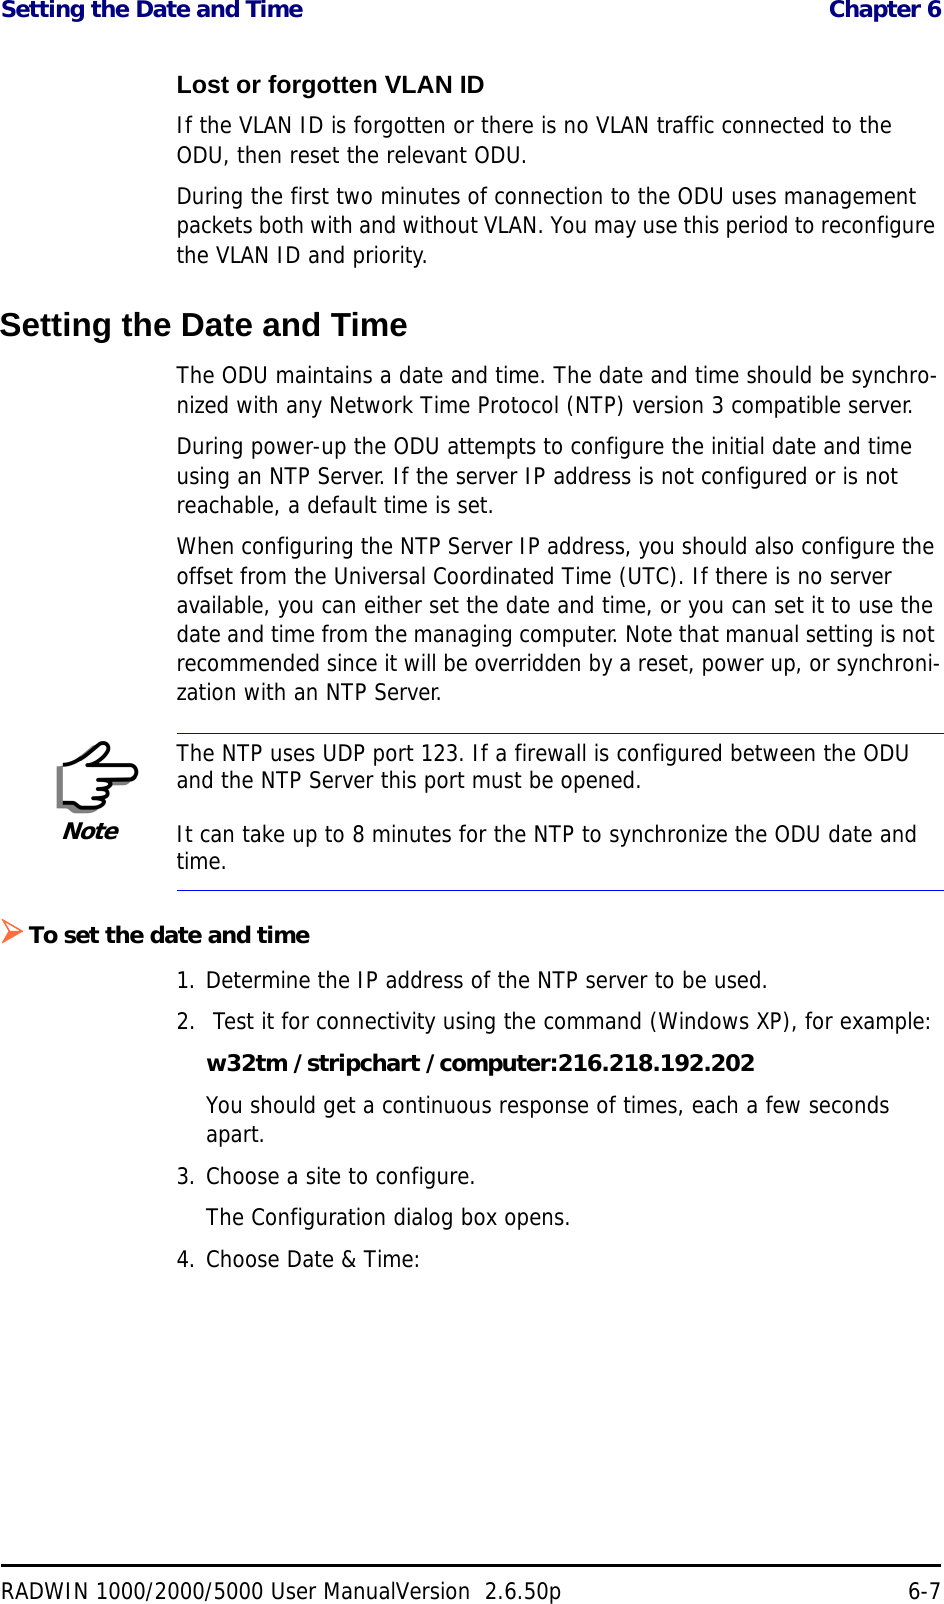 Setting the Date and Time  Chapter 6RADWIN 1000/2000/5000 User ManualVersion  2.6.50p 6-7Lost or forgotten VLAN IDIf the VLAN ID is forgotten or there is no VLAN traffic connected to the ODU, then reset the relevant ODU.During the first two minutes of connection to the ODU uses management packets both with and without VLAN. You may use this period to reconfigure the VLAN ID and priority.Setting the Date and TimeThe ODU maintains a date and time. The date and time should be synchro-nized with any Network Time Protocol (NTP) version 3 compatible server.During power-up the ODU attempts to configure the initial date and time using an NTP Server. If the server IP address is not configured or is not reachable, a default time is set.When configuring the NTP Server IP address, you should also configure the offset from the Universal Coordinated Time (UTC). If there is no server available, you can either set the date and time, or you can set it to use the date and time from the managing computer. Note that manual setting is not recommended since it will be overridden by a reset, power up, or synchroni-zation with an NTP Server.To set the date and time1. Determine the IP address of the NTP server to be used.2.  Test it for connectivity using the command (Windows XP), for example:w32tm /stripchart /computer:216.218.192.202You should get a continuous response of times, each a few seconds apart.3. Choose a site to configure.The Configuration dialog box opens.4. Choose Date &amp; Time:NoteThe NTP uses UDP port 123. If a firewall is configured between the ODU and the NTP Server this port must be opened.It can take up to 8 minutes for the NTP to synchronize the ODU date and time.